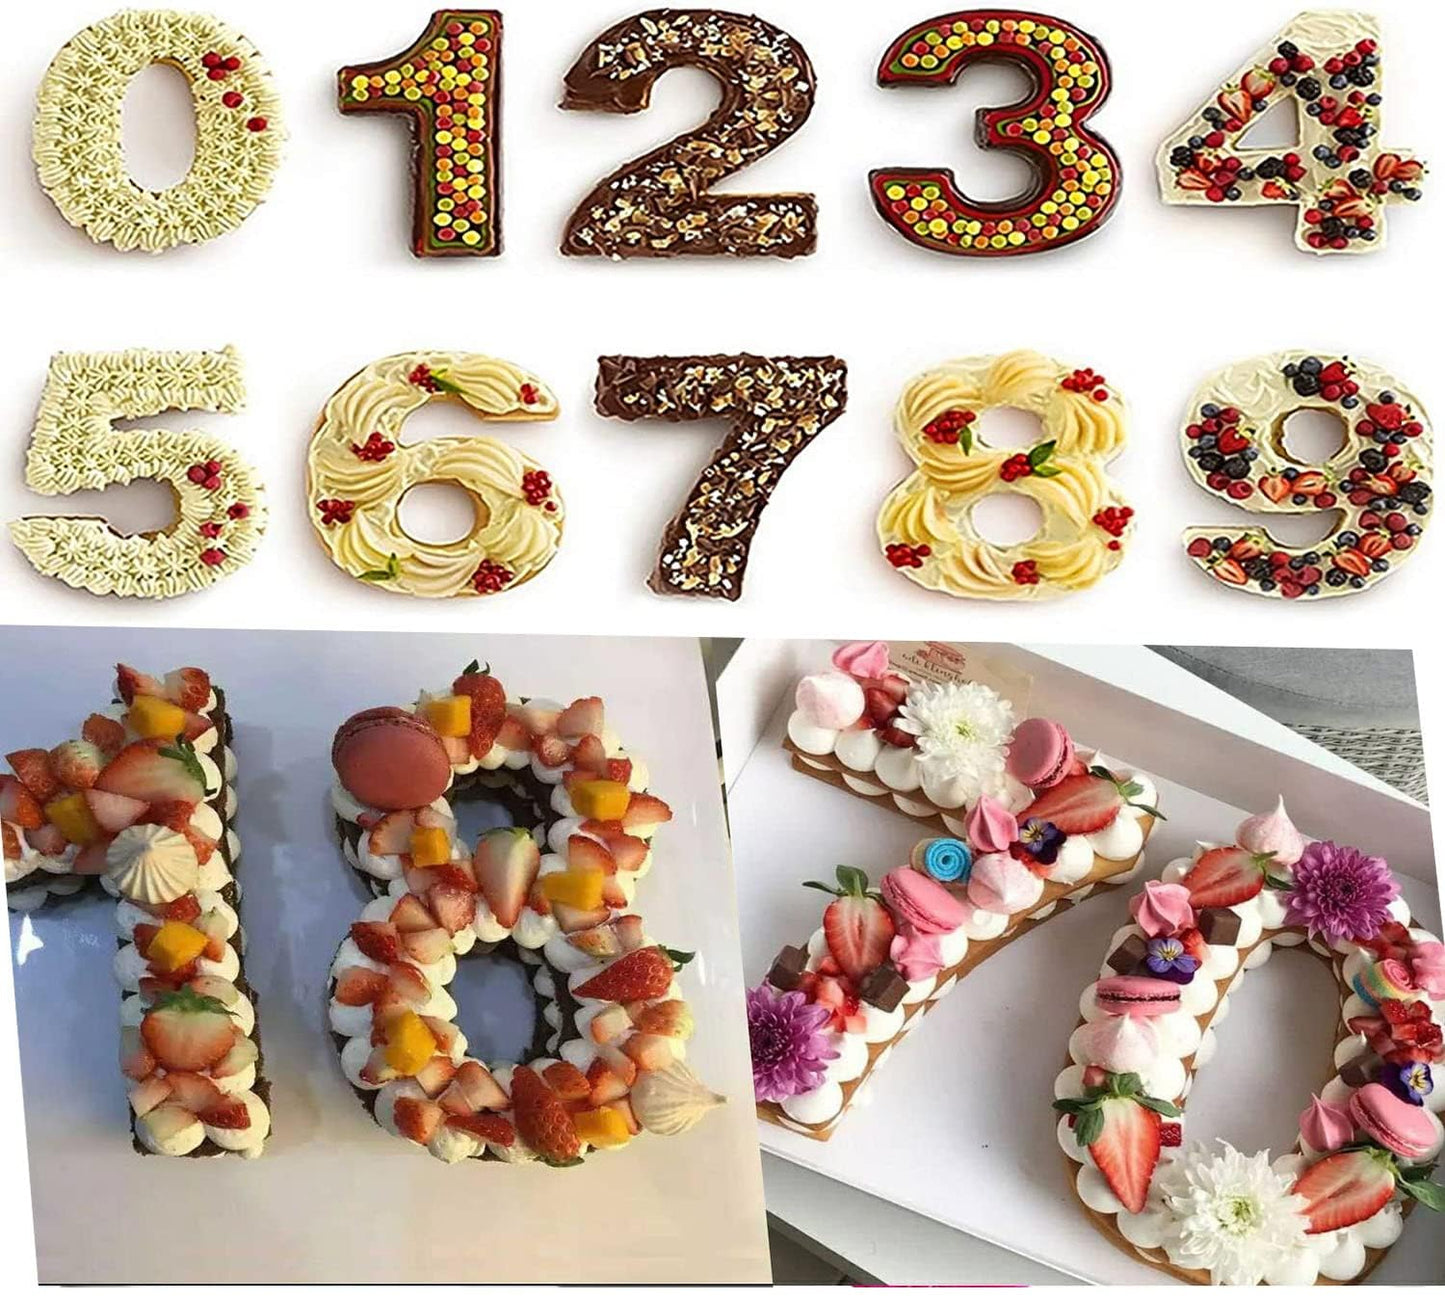 A to Z Alphabet Letter & 0-9 Number Cake Stencils -12 inches (Pack of 1)